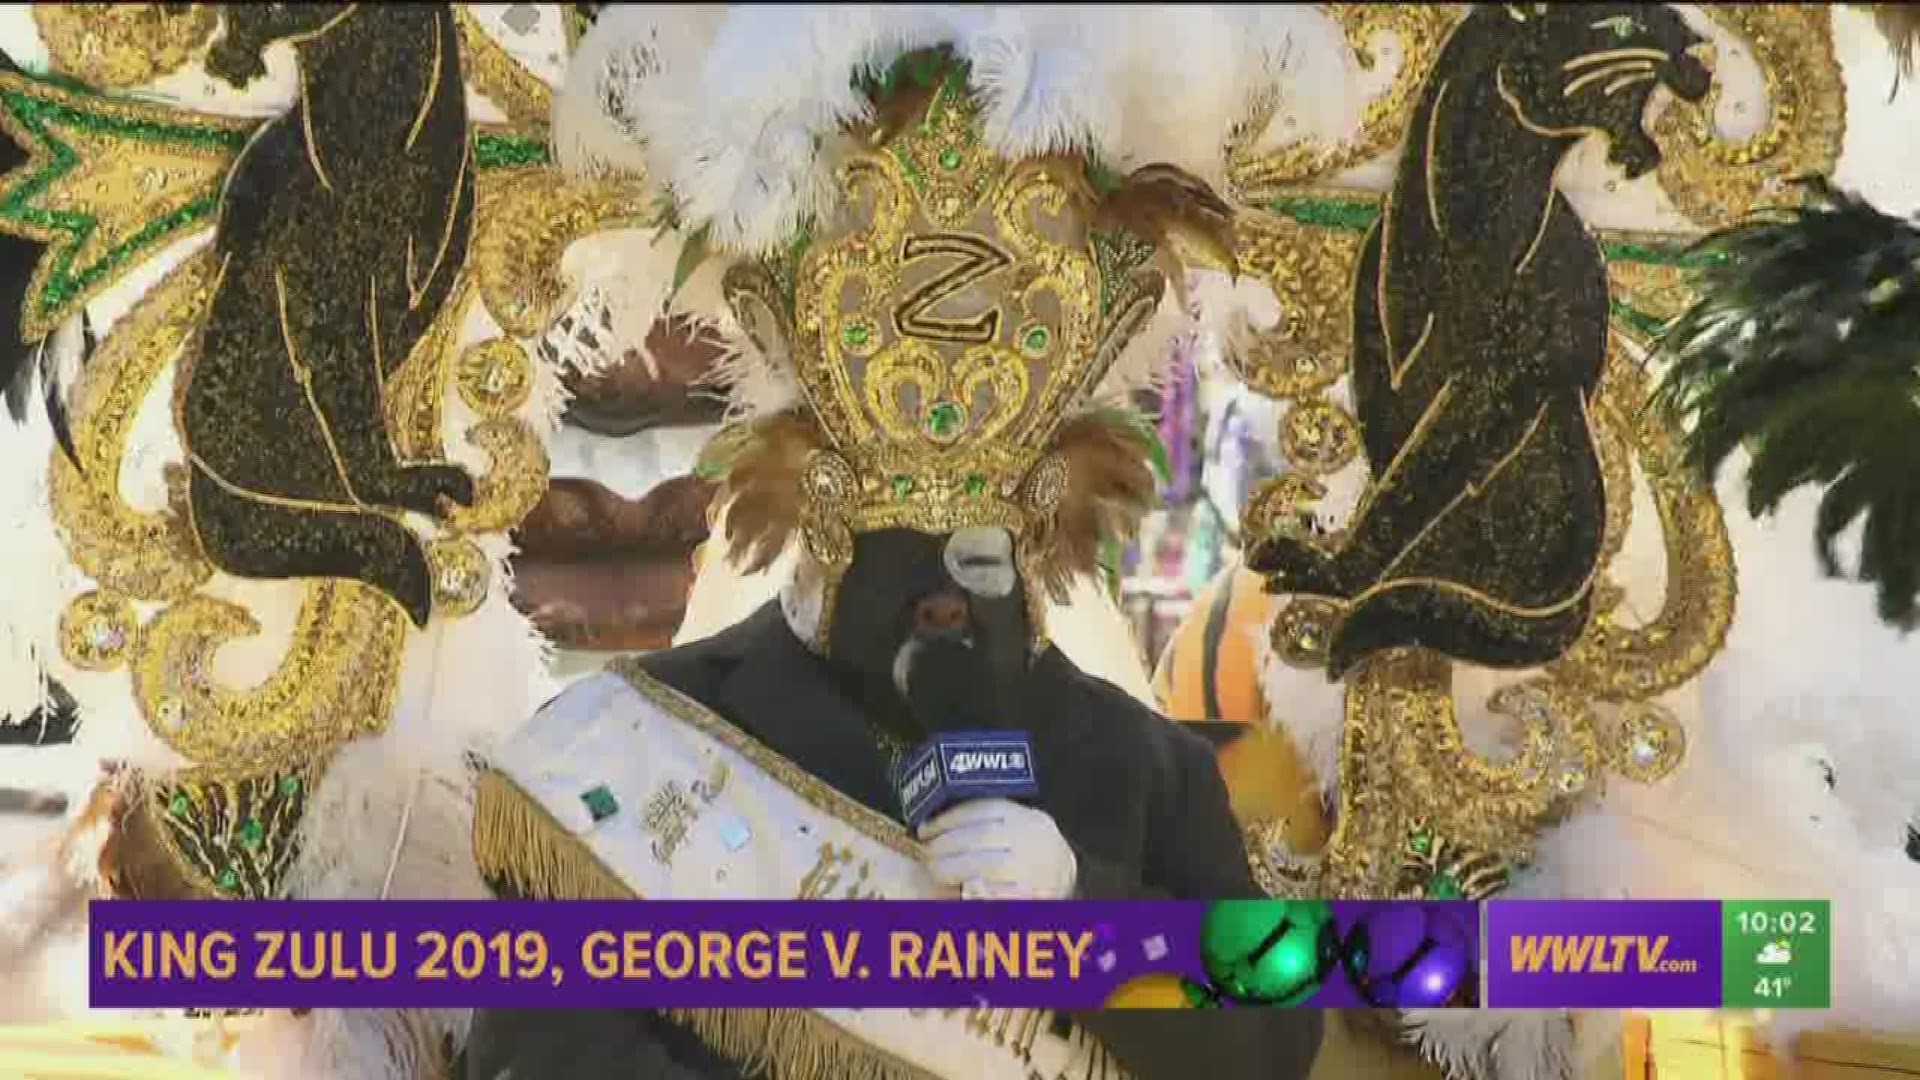 King Zulu 2019, George V. Rainey said this will be the best Mardi Gras yet.